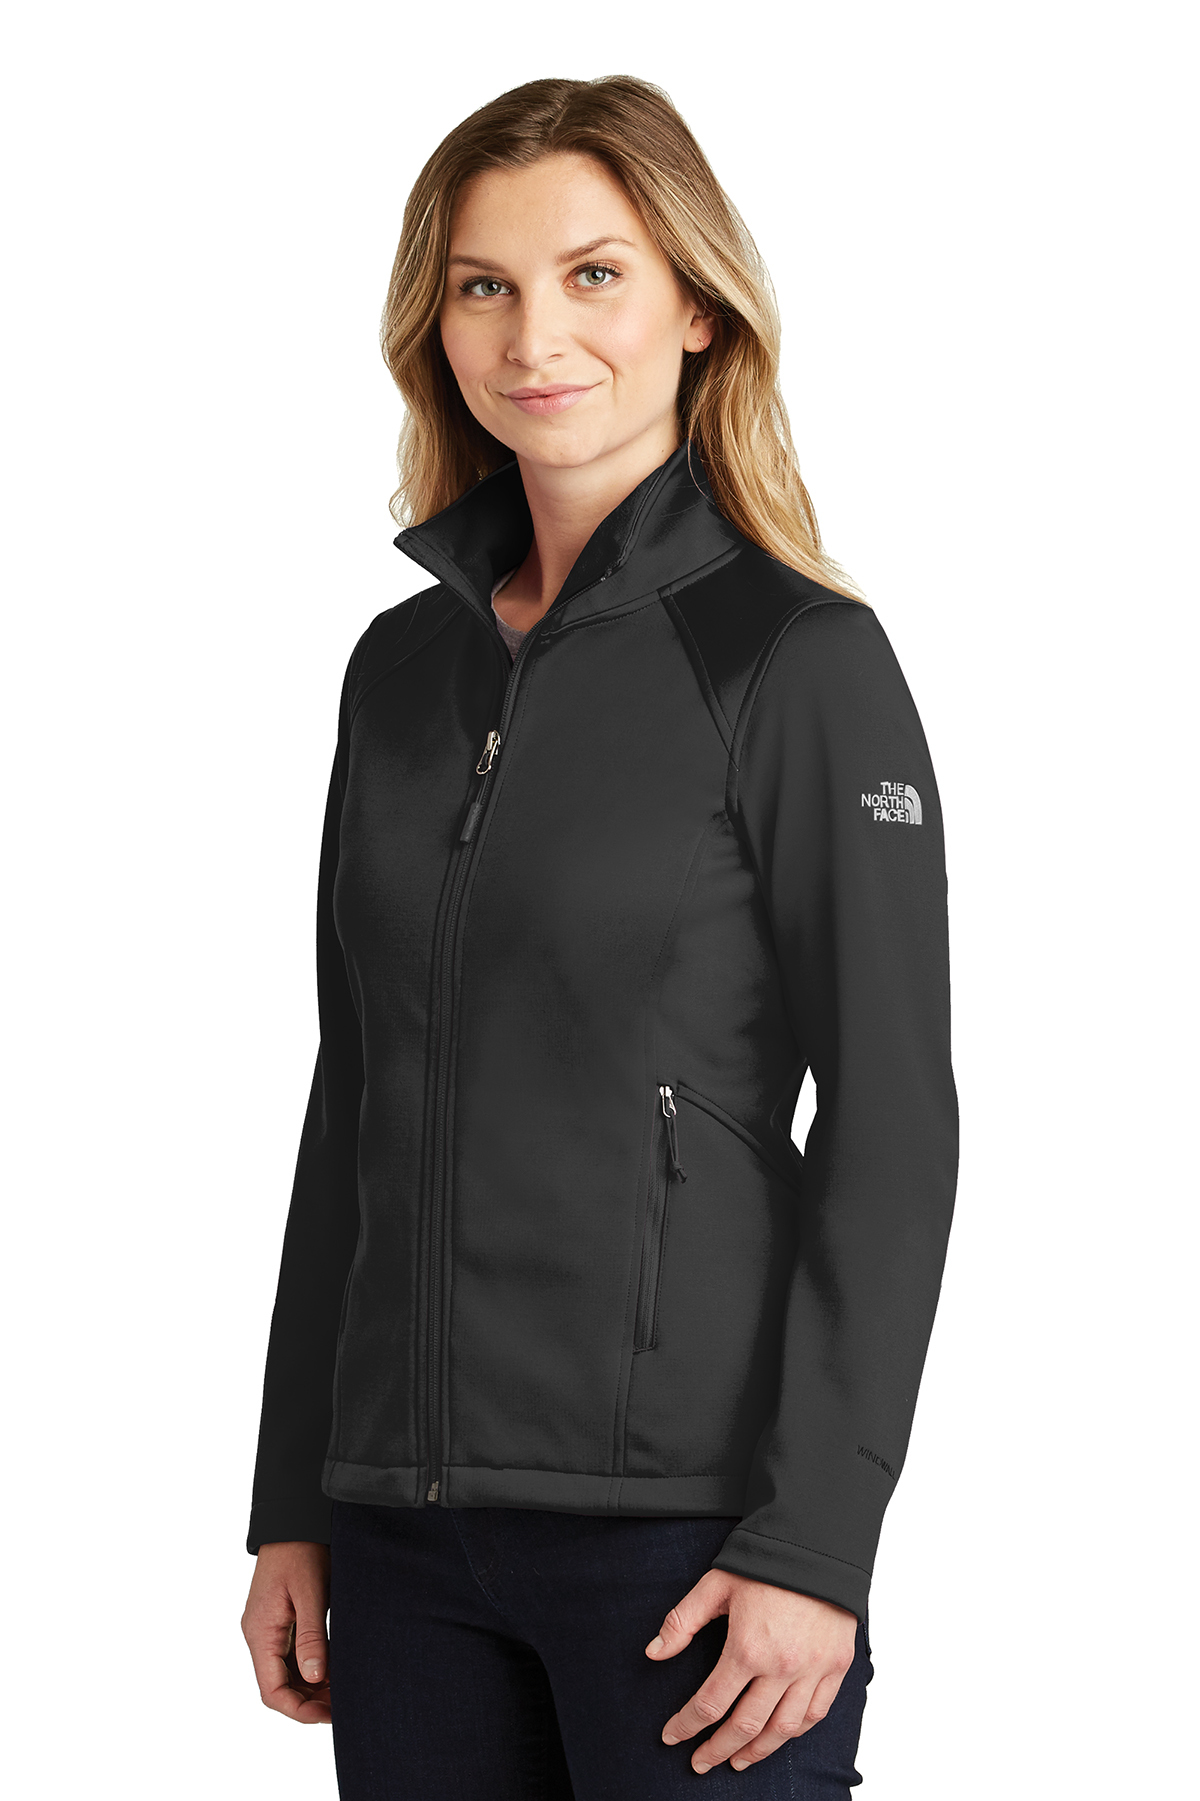 Willen Baffle Pijnboom The North Face<SUP>®</SUP> Ladies Ridgewall Soft Shell Jacket | Product |  SanMar